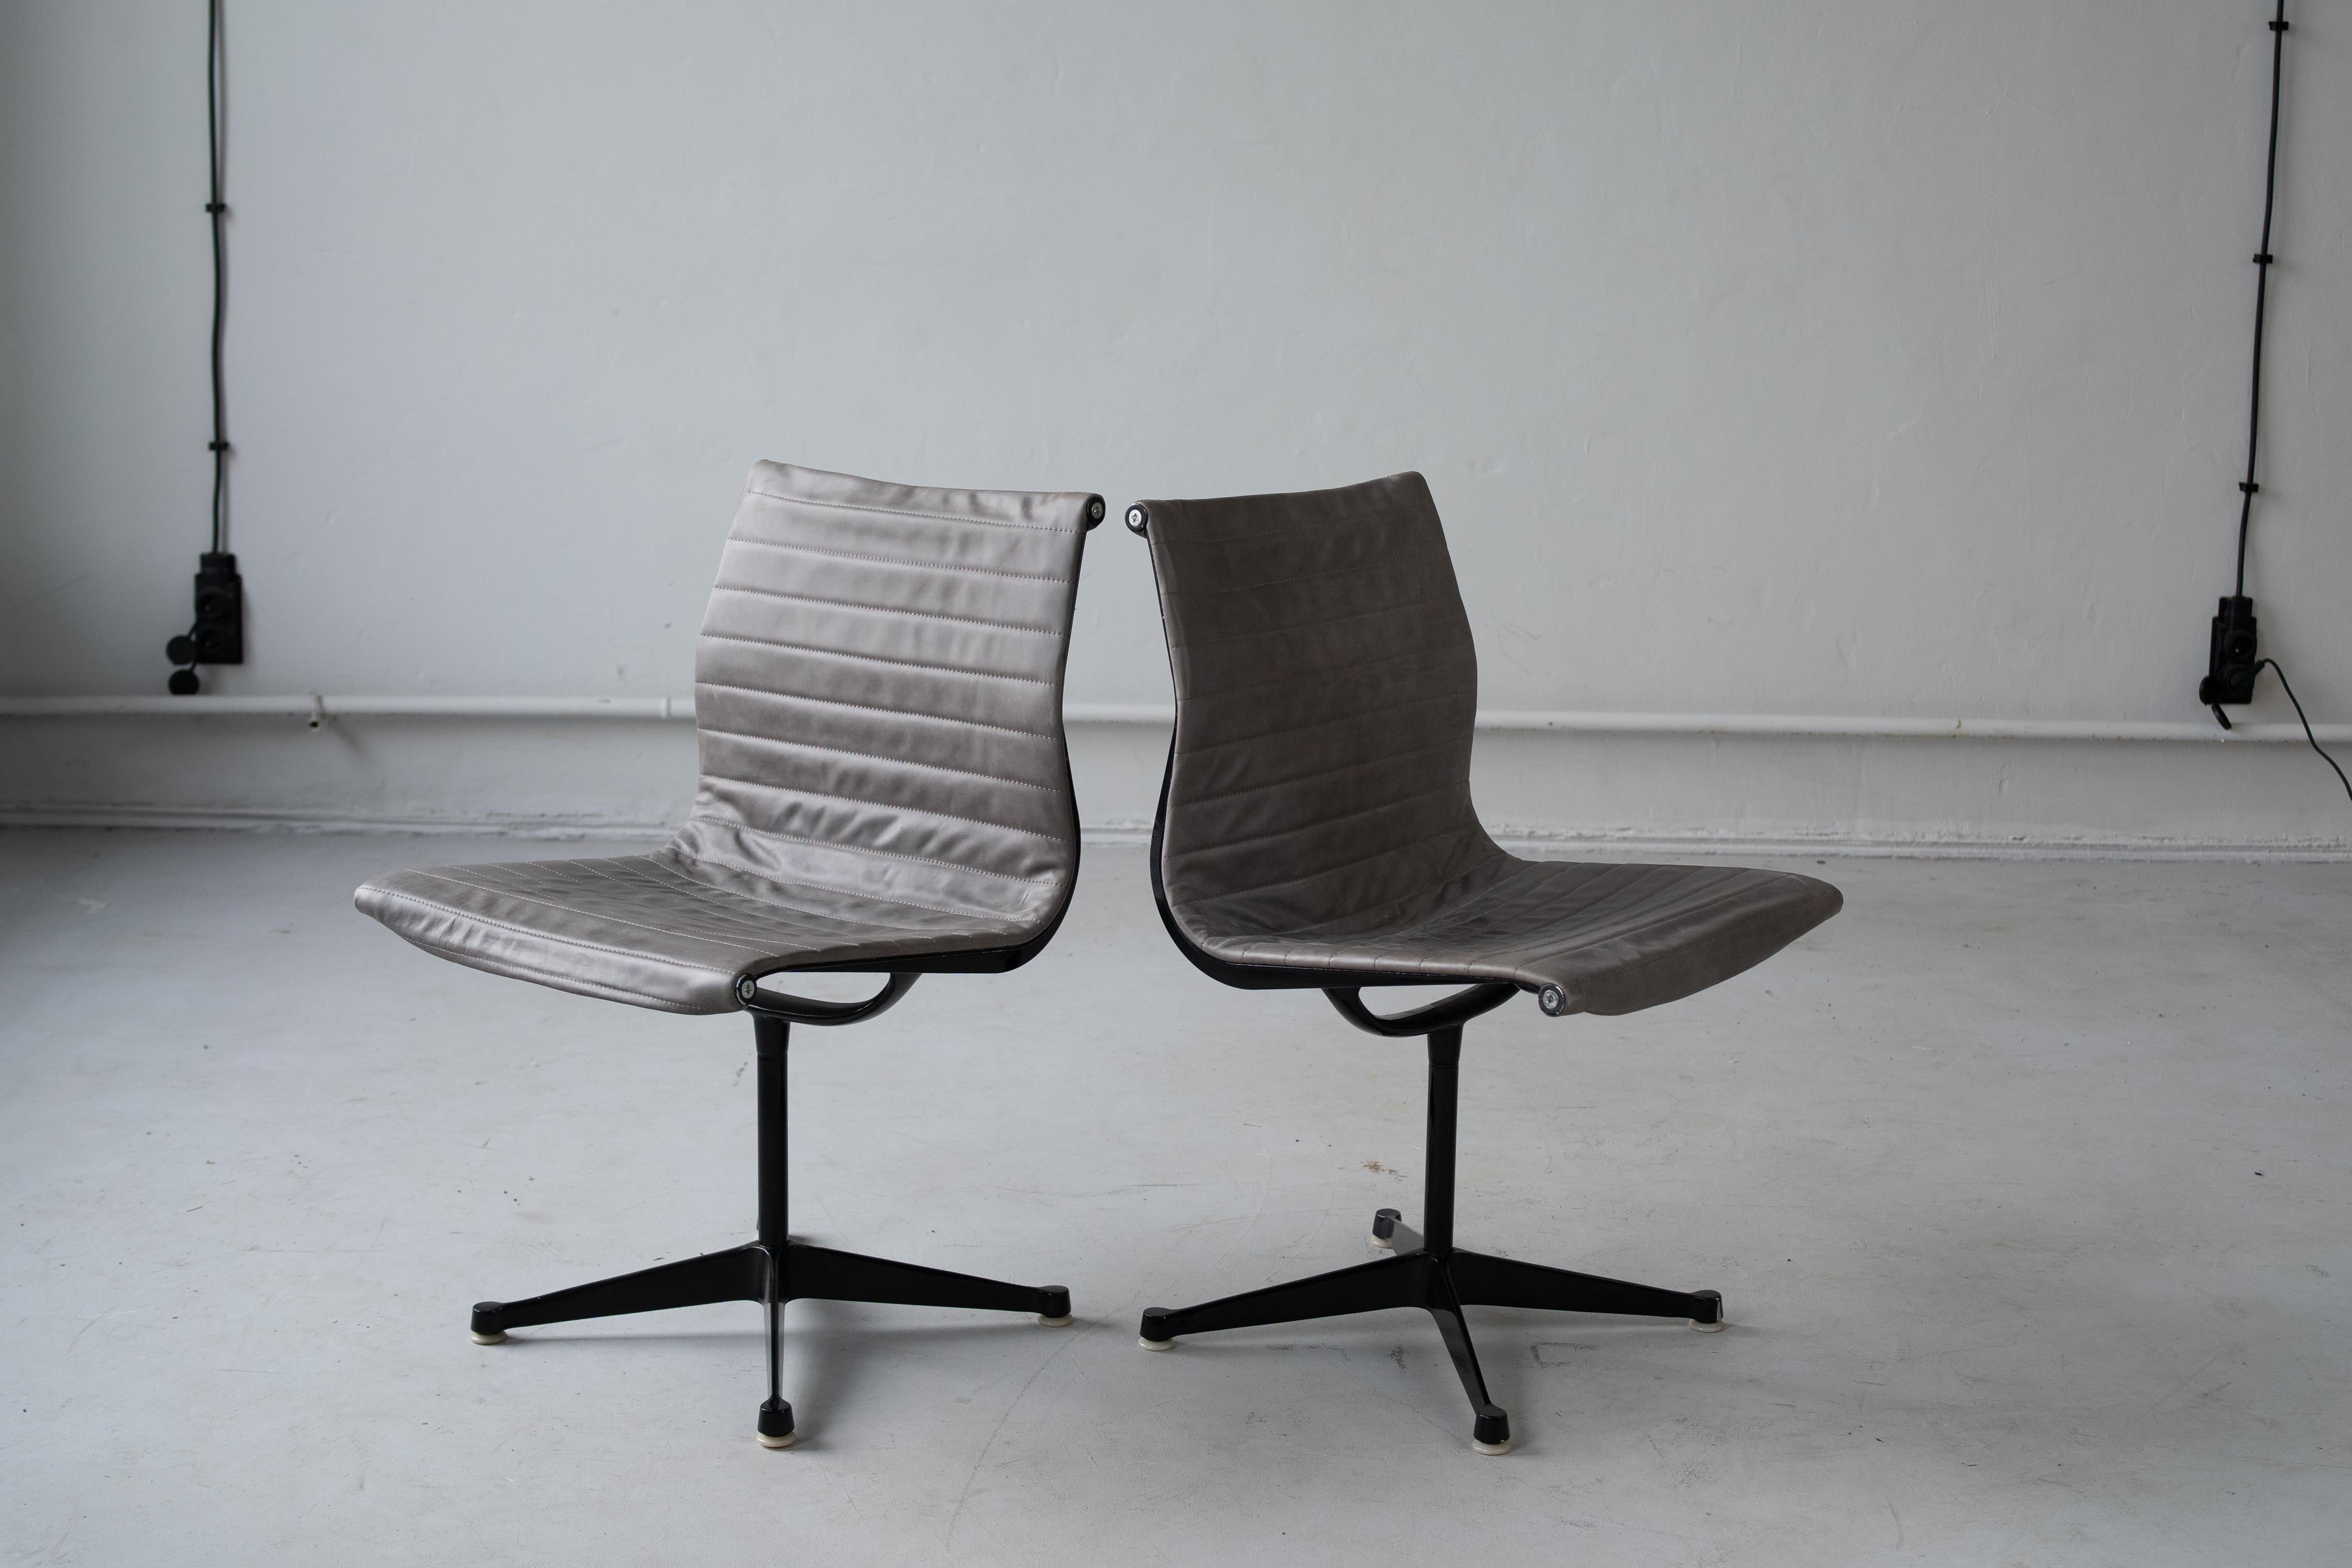 Aluminium chair by Charles and Ray Eames, set of 2 chairs In Good Condition For Sale In Porto, PT